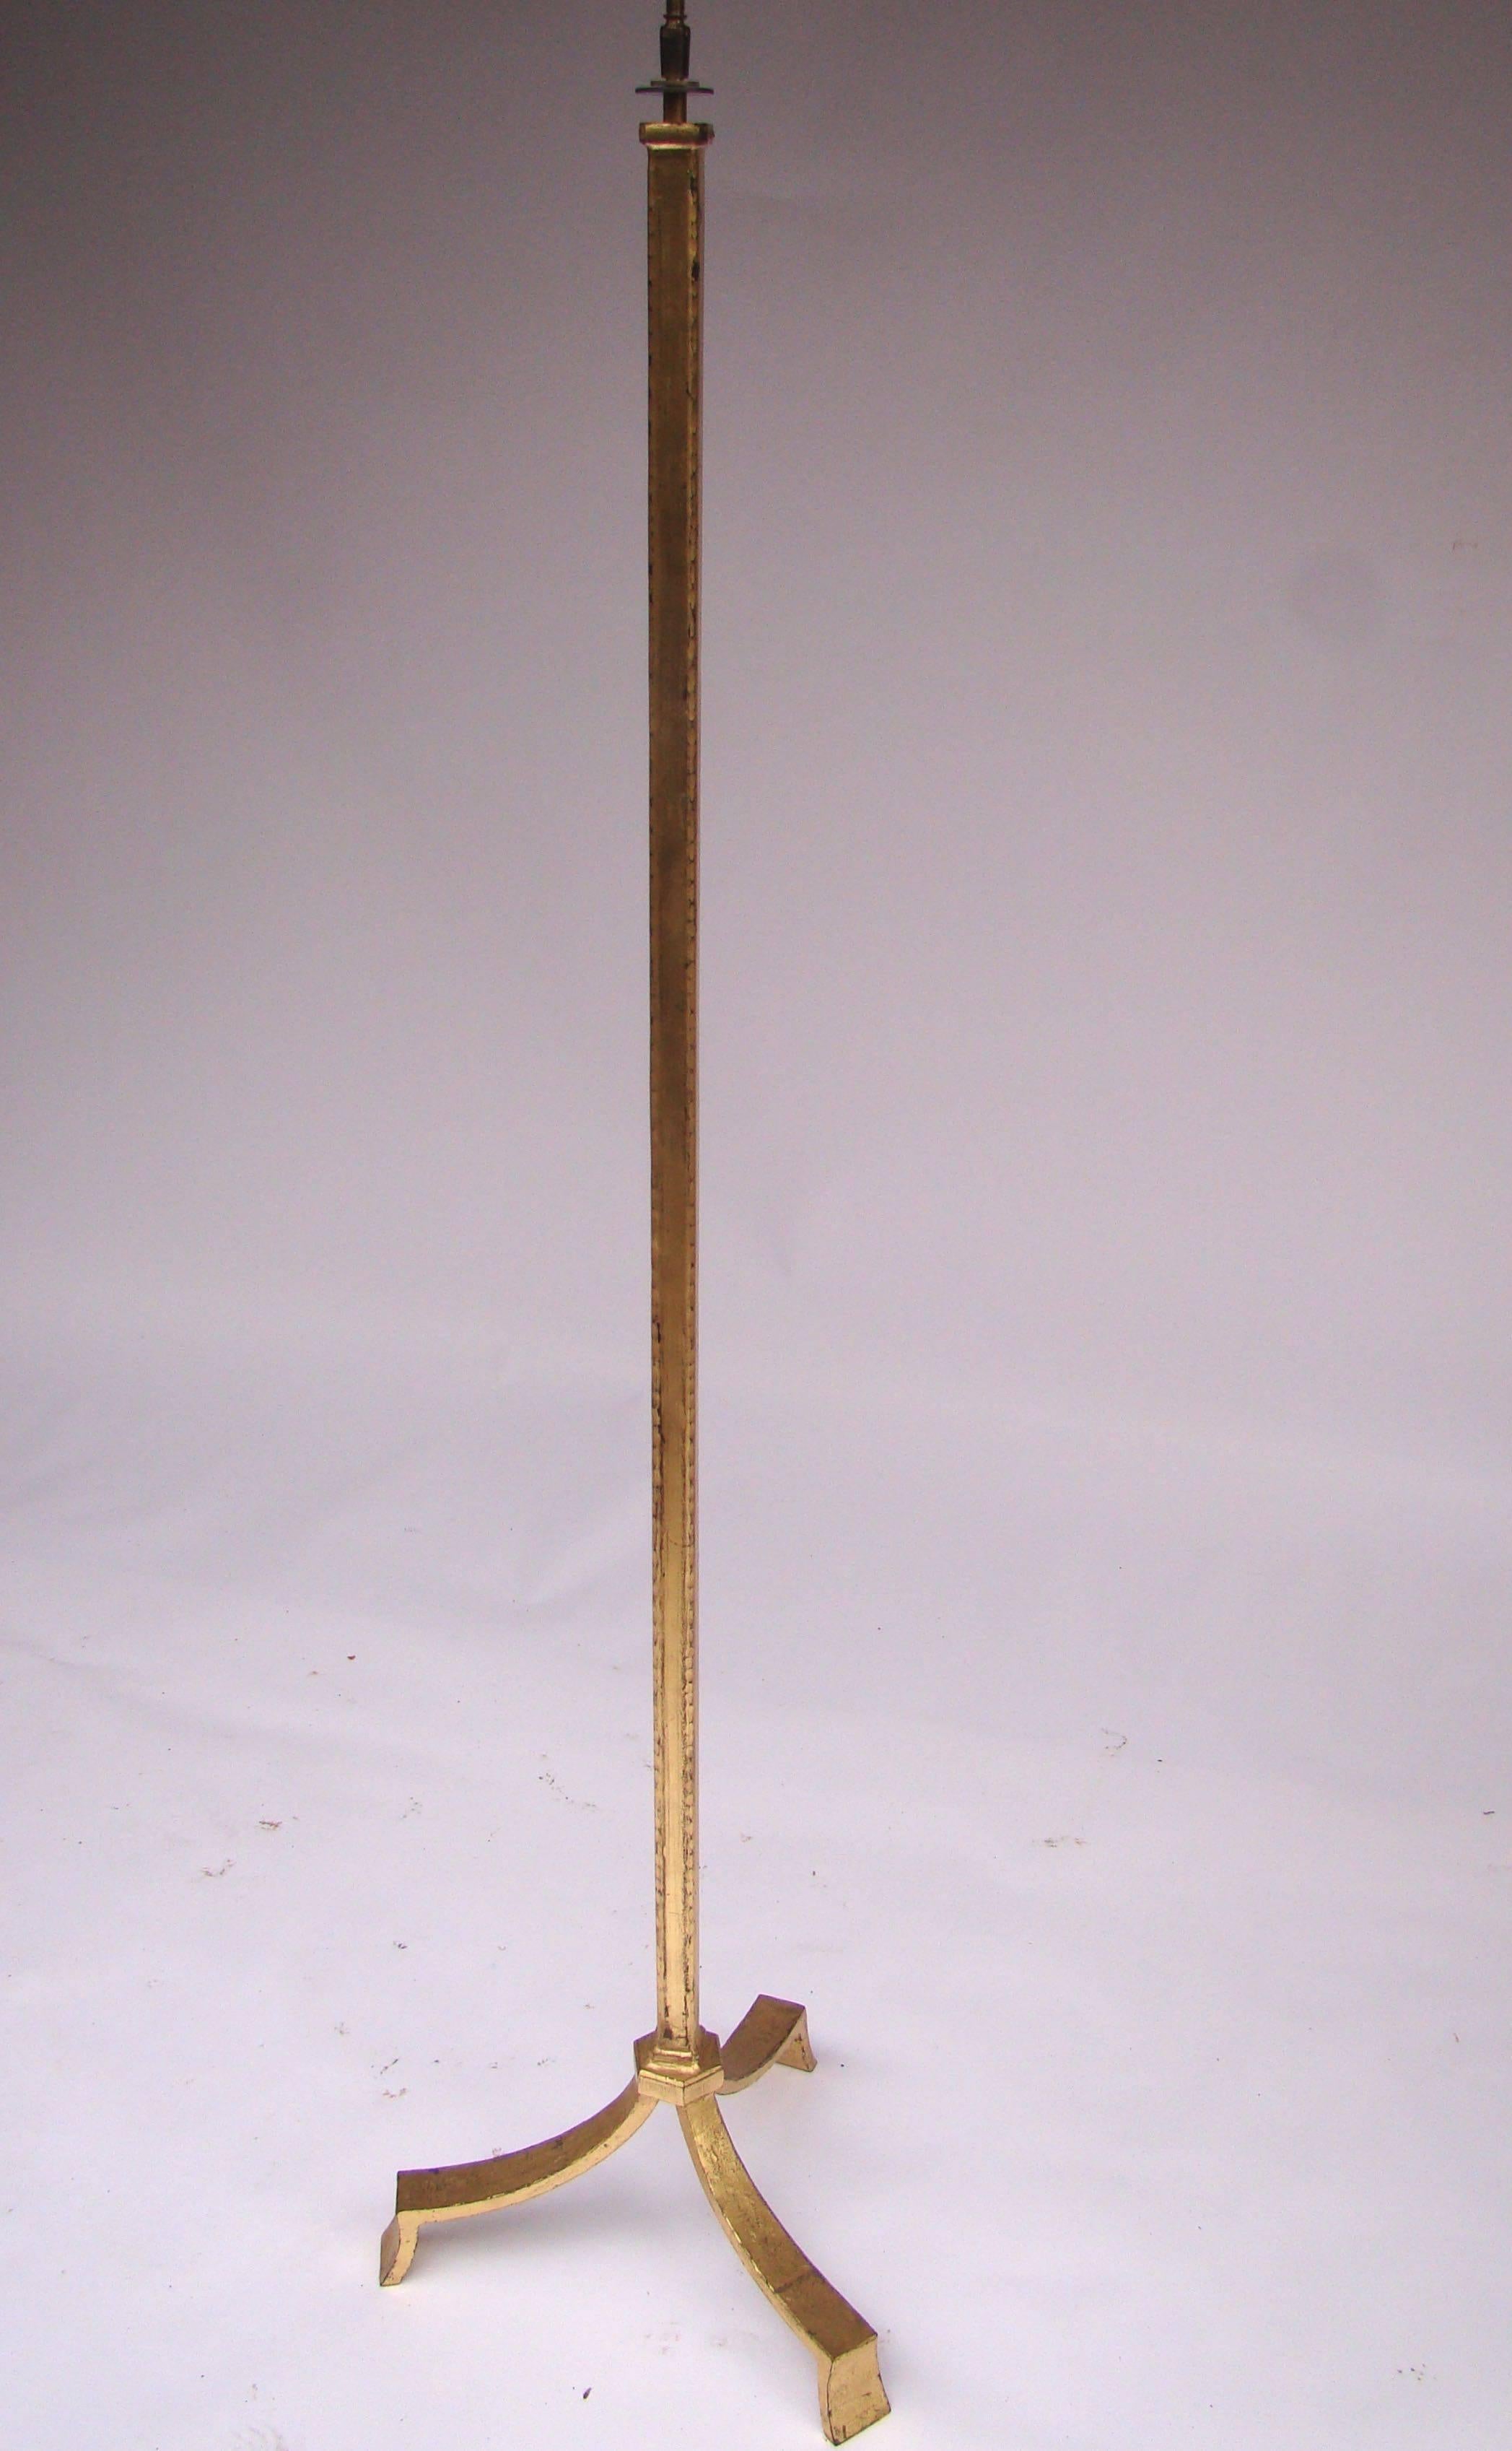 Floor lamp in gold leaf gilded wrought iron by Maison Ramsay, circa 1940.
Signed under one leg (visible on the last picture).